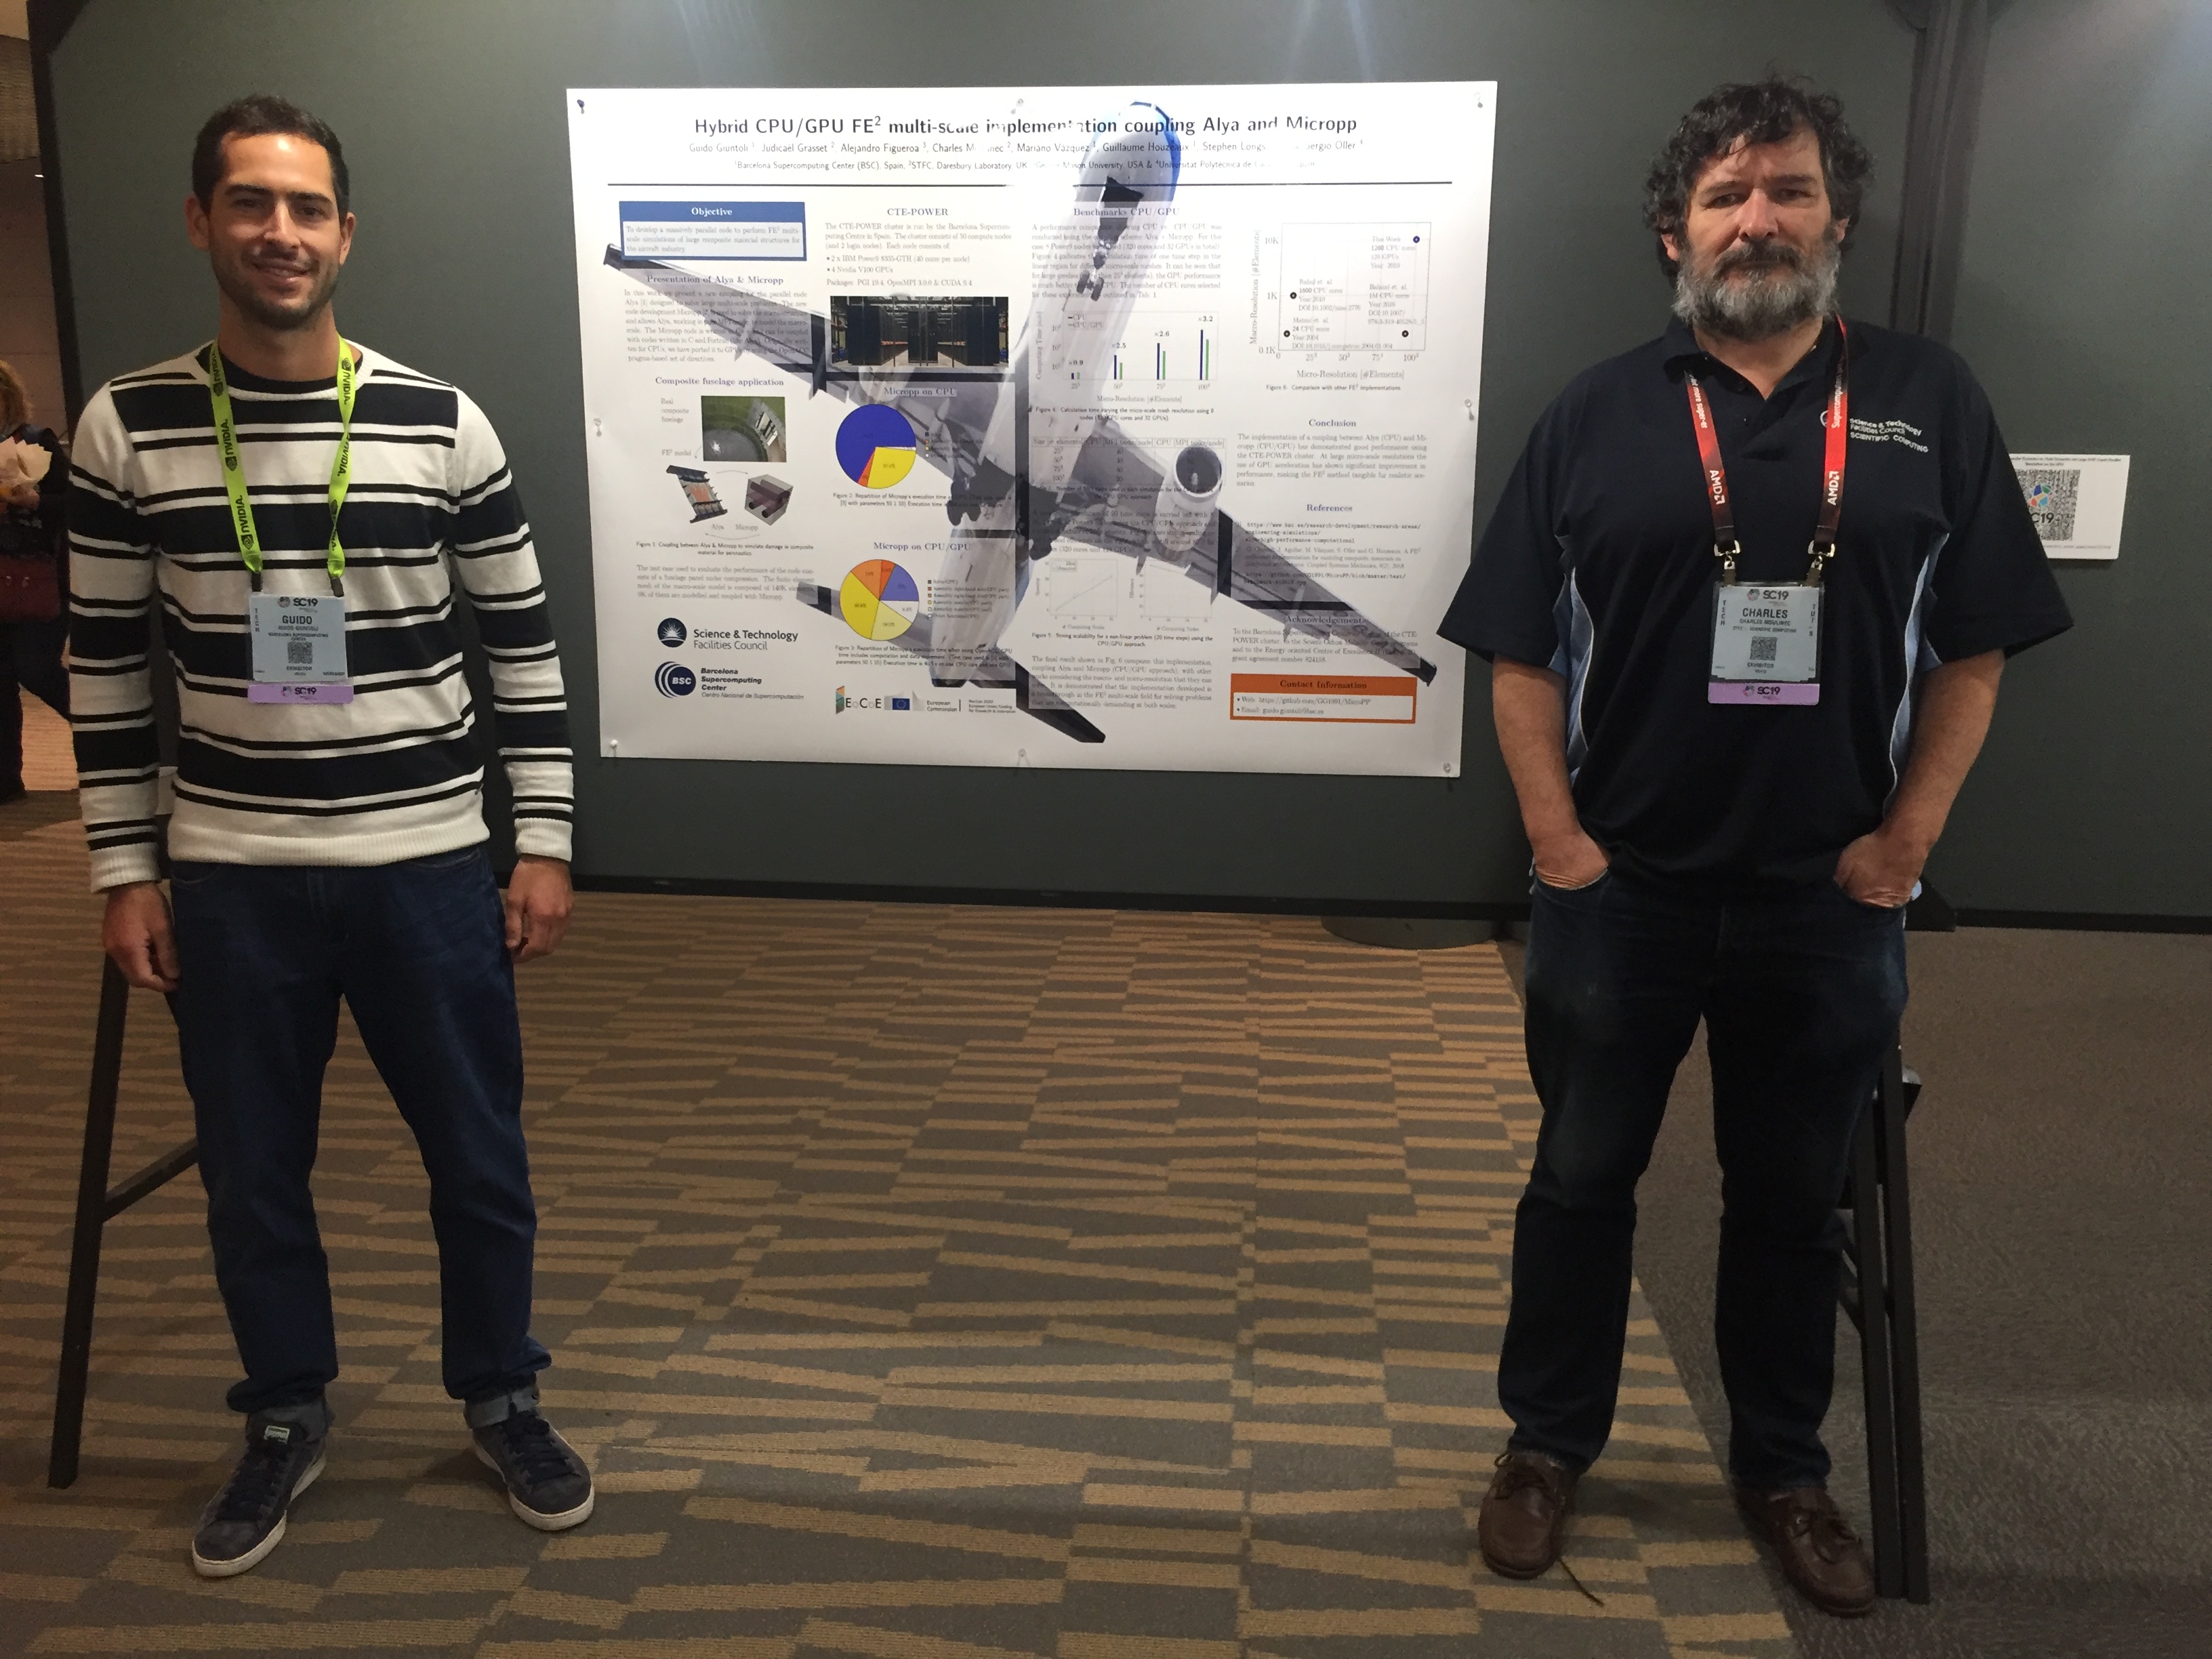 Charles Moulinec and Guido Guintoli presenting poster.